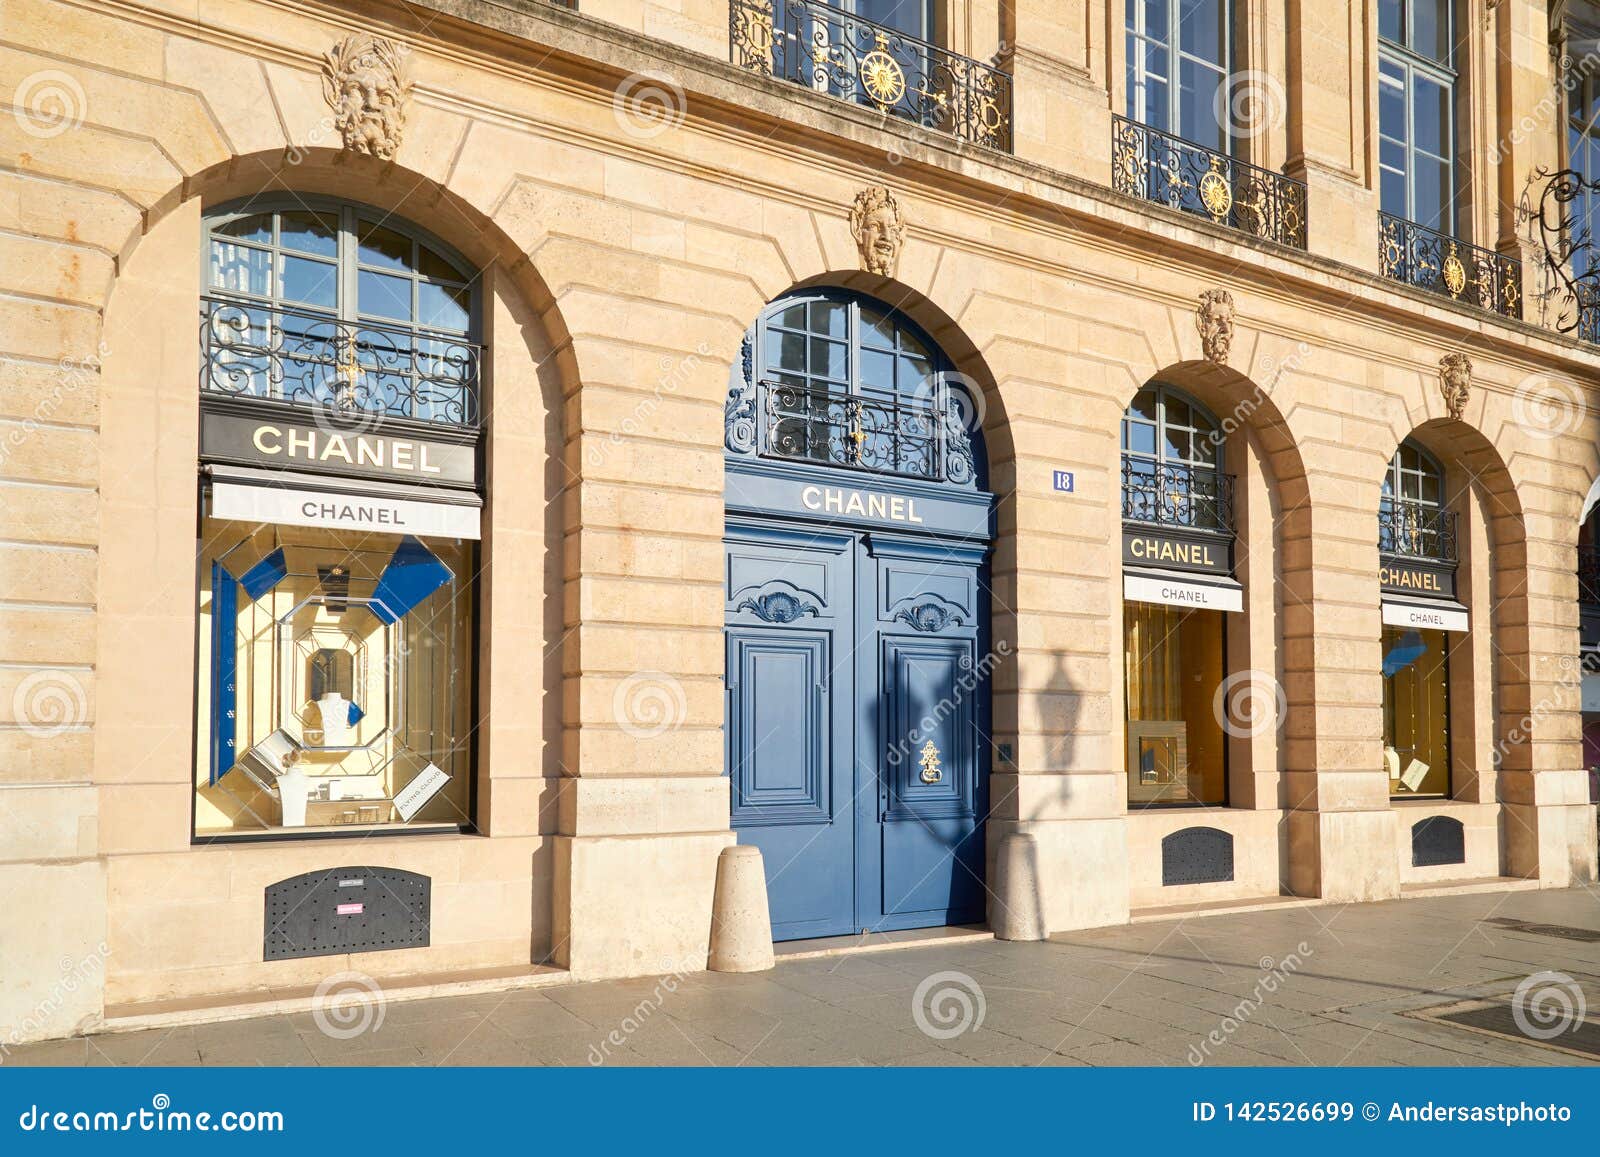 Chanel Luxury Store In Place Vendome In Paris, France Editorial Stock Image - Image of glass ...